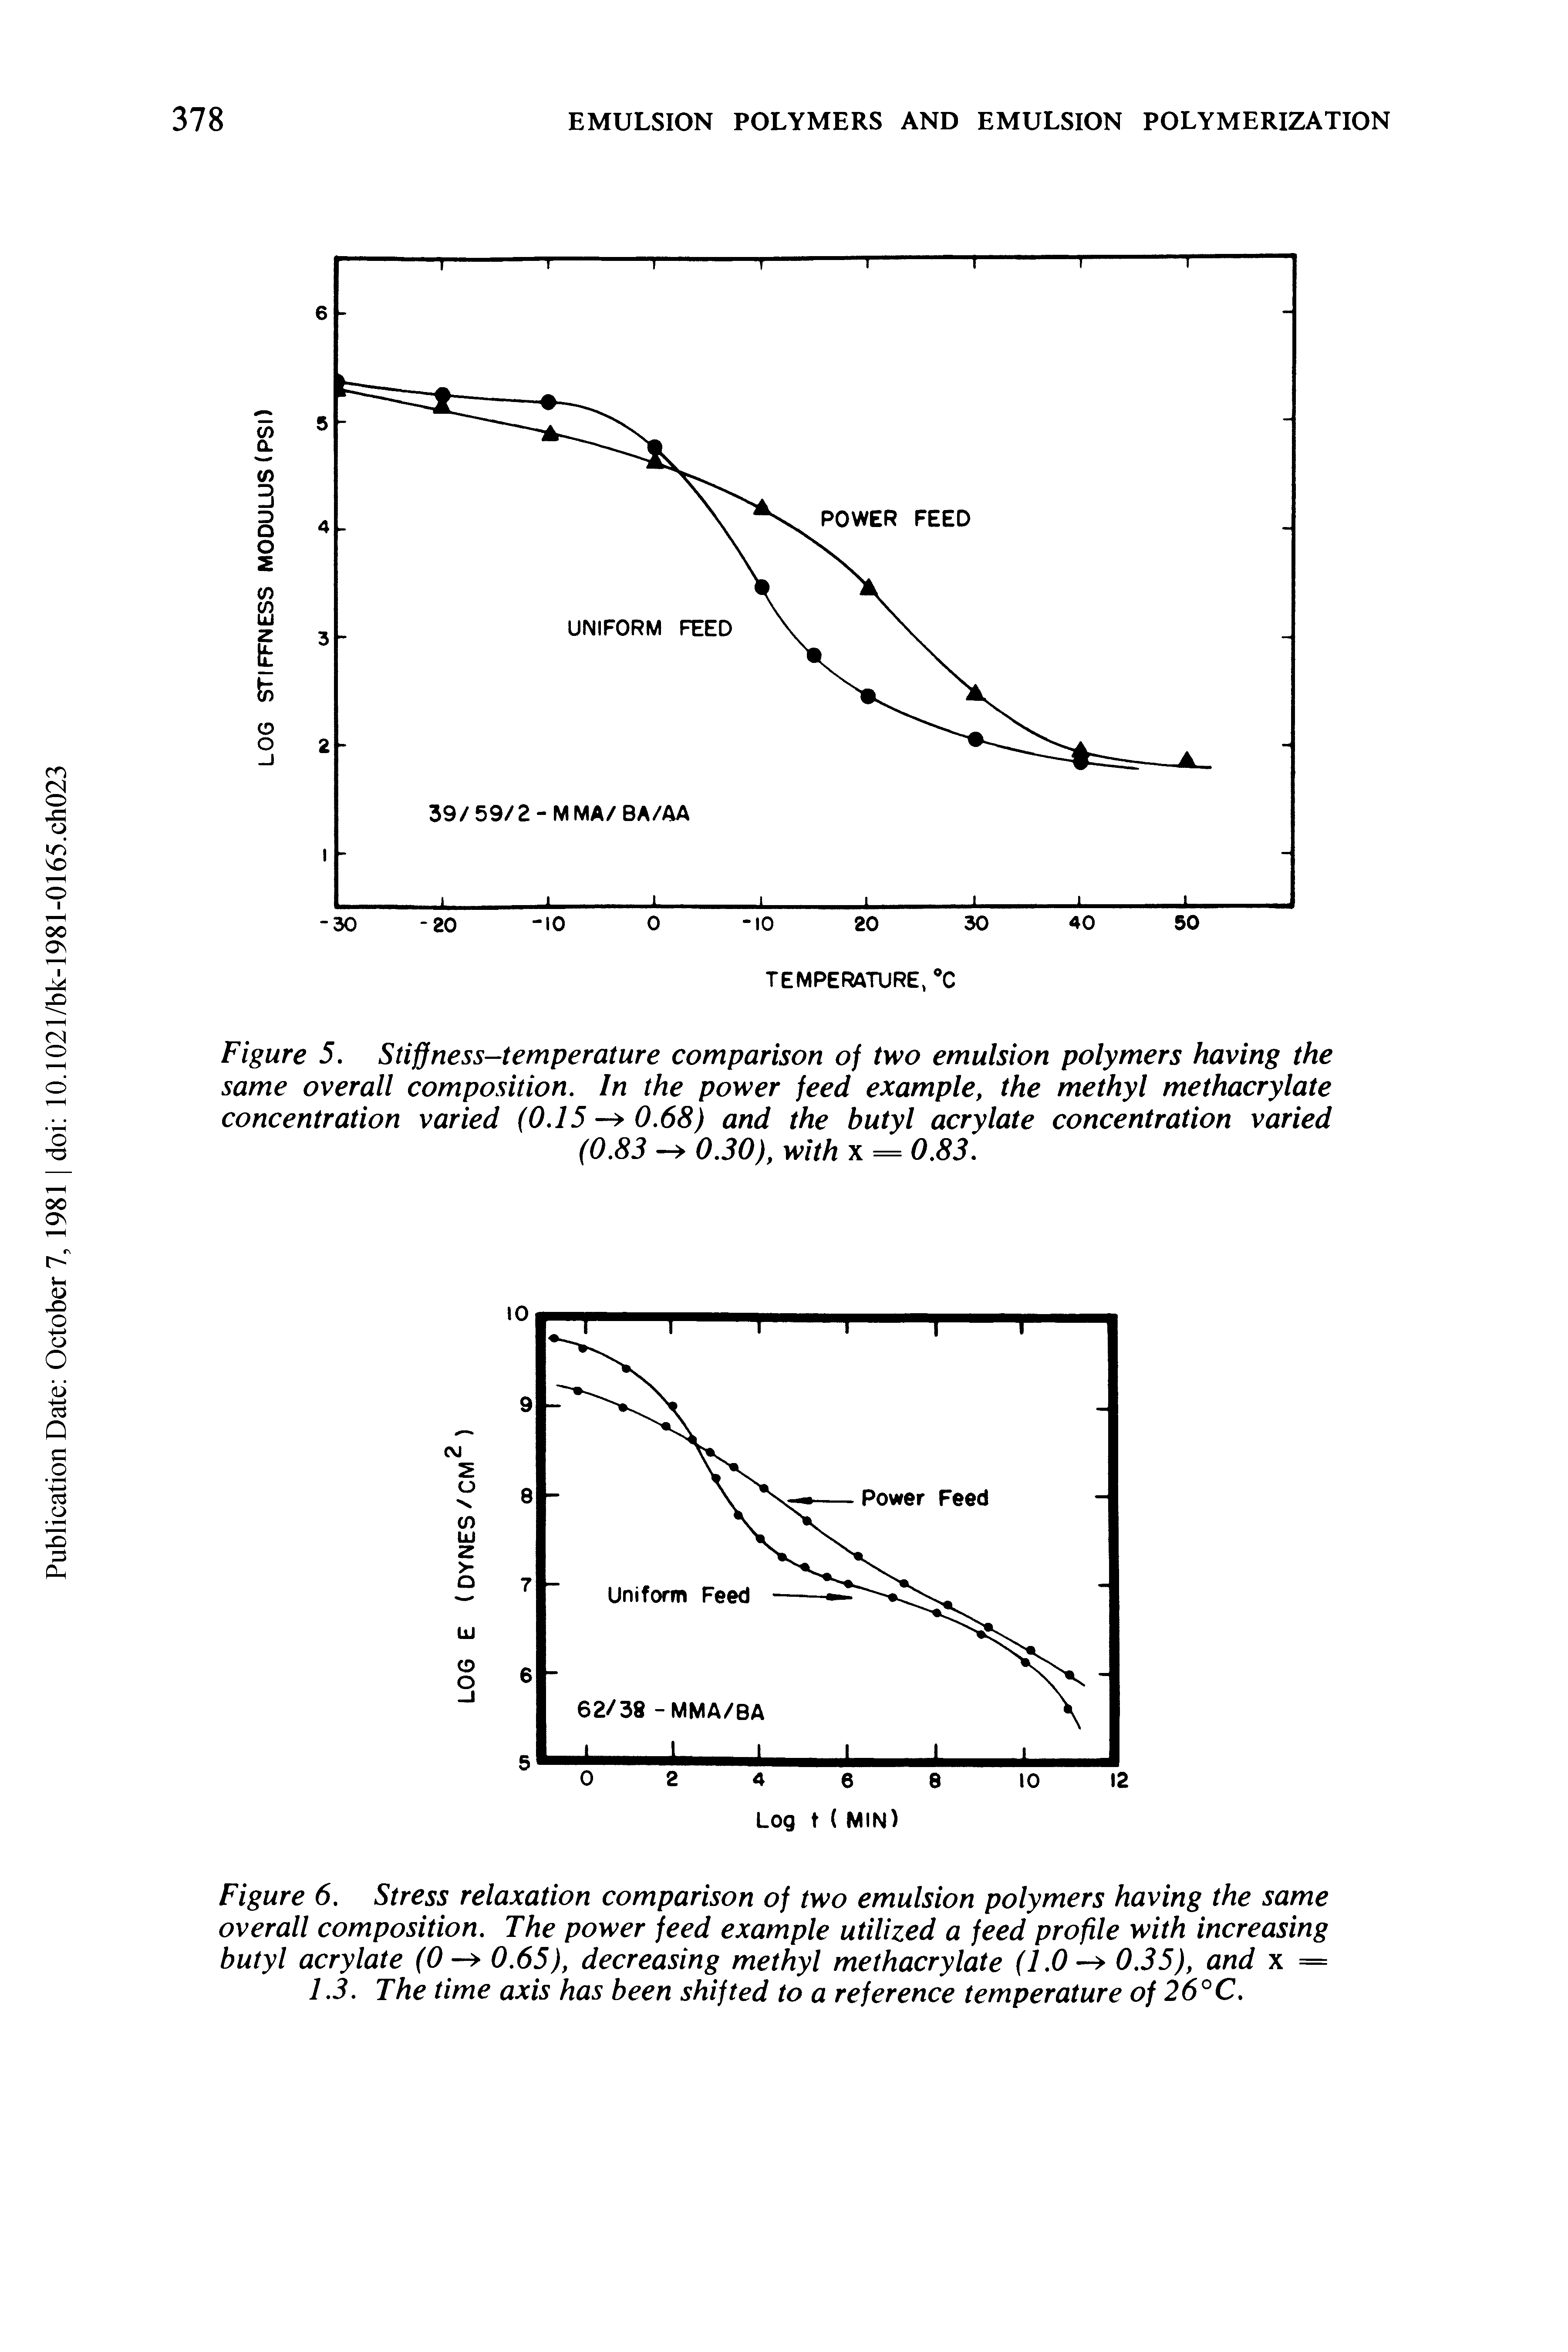 Figure 6. Stress relaxation comparison of two emulsion polymers having the same overall composition. The power feed example utilized a feed profile with increasing butyl acrylate (0-> 0.65), decreasing methyl methacrylate (1.0 -> 0.35), and x = 1.3. The time axis has been shifted to a reference temperature of 26°C.